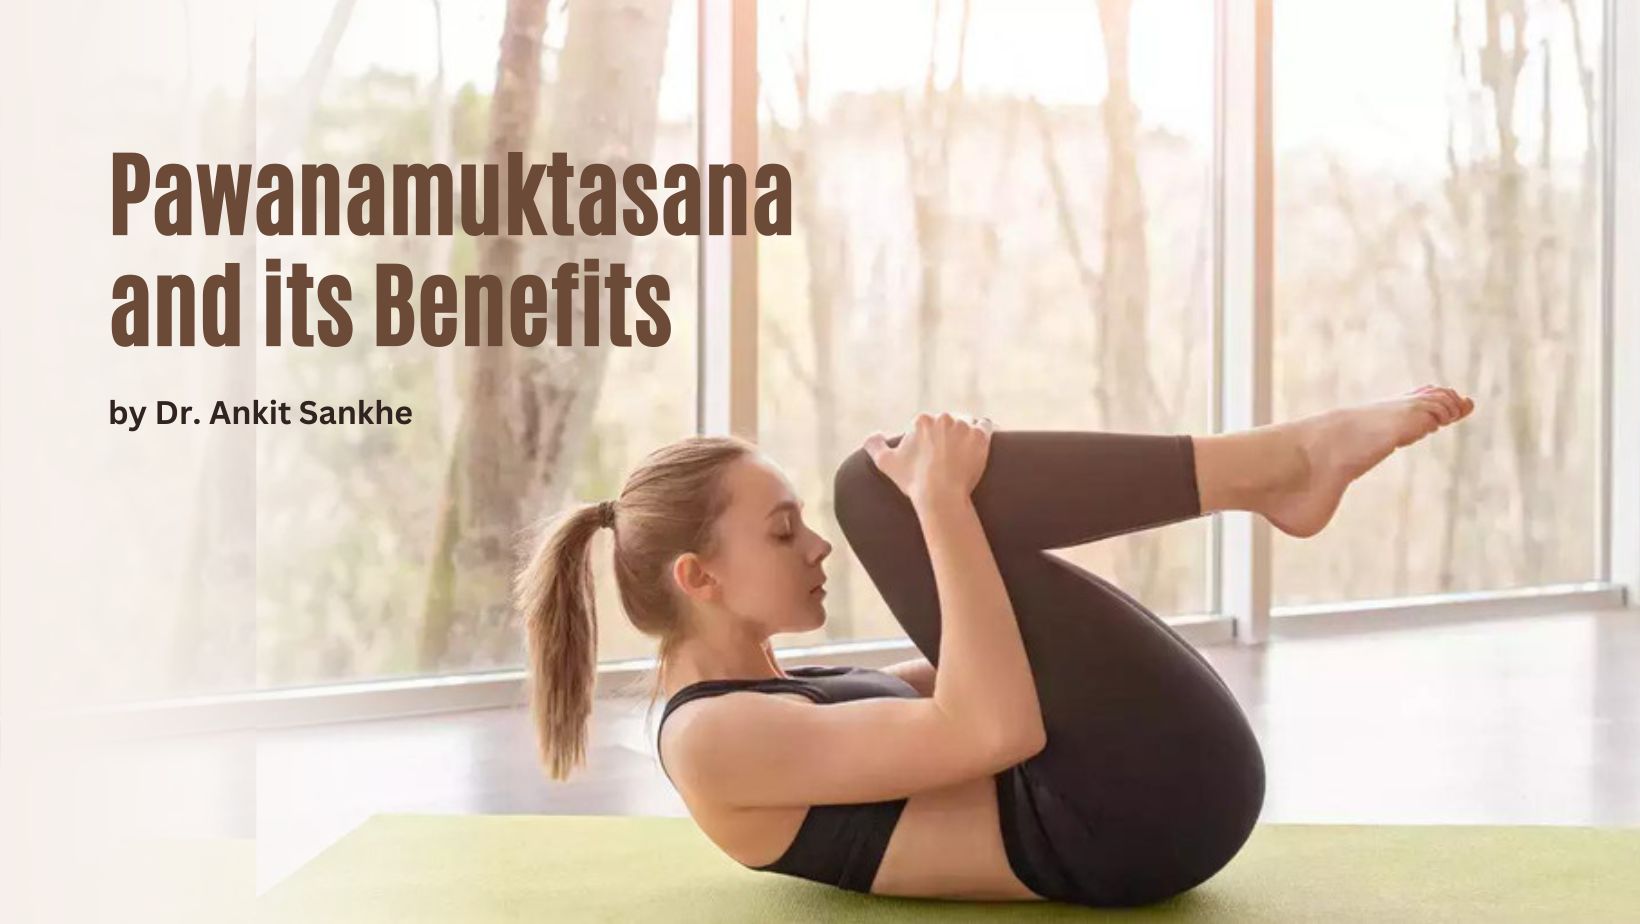 How To Do The Pawanmuktasana And What Are Its Benefits?